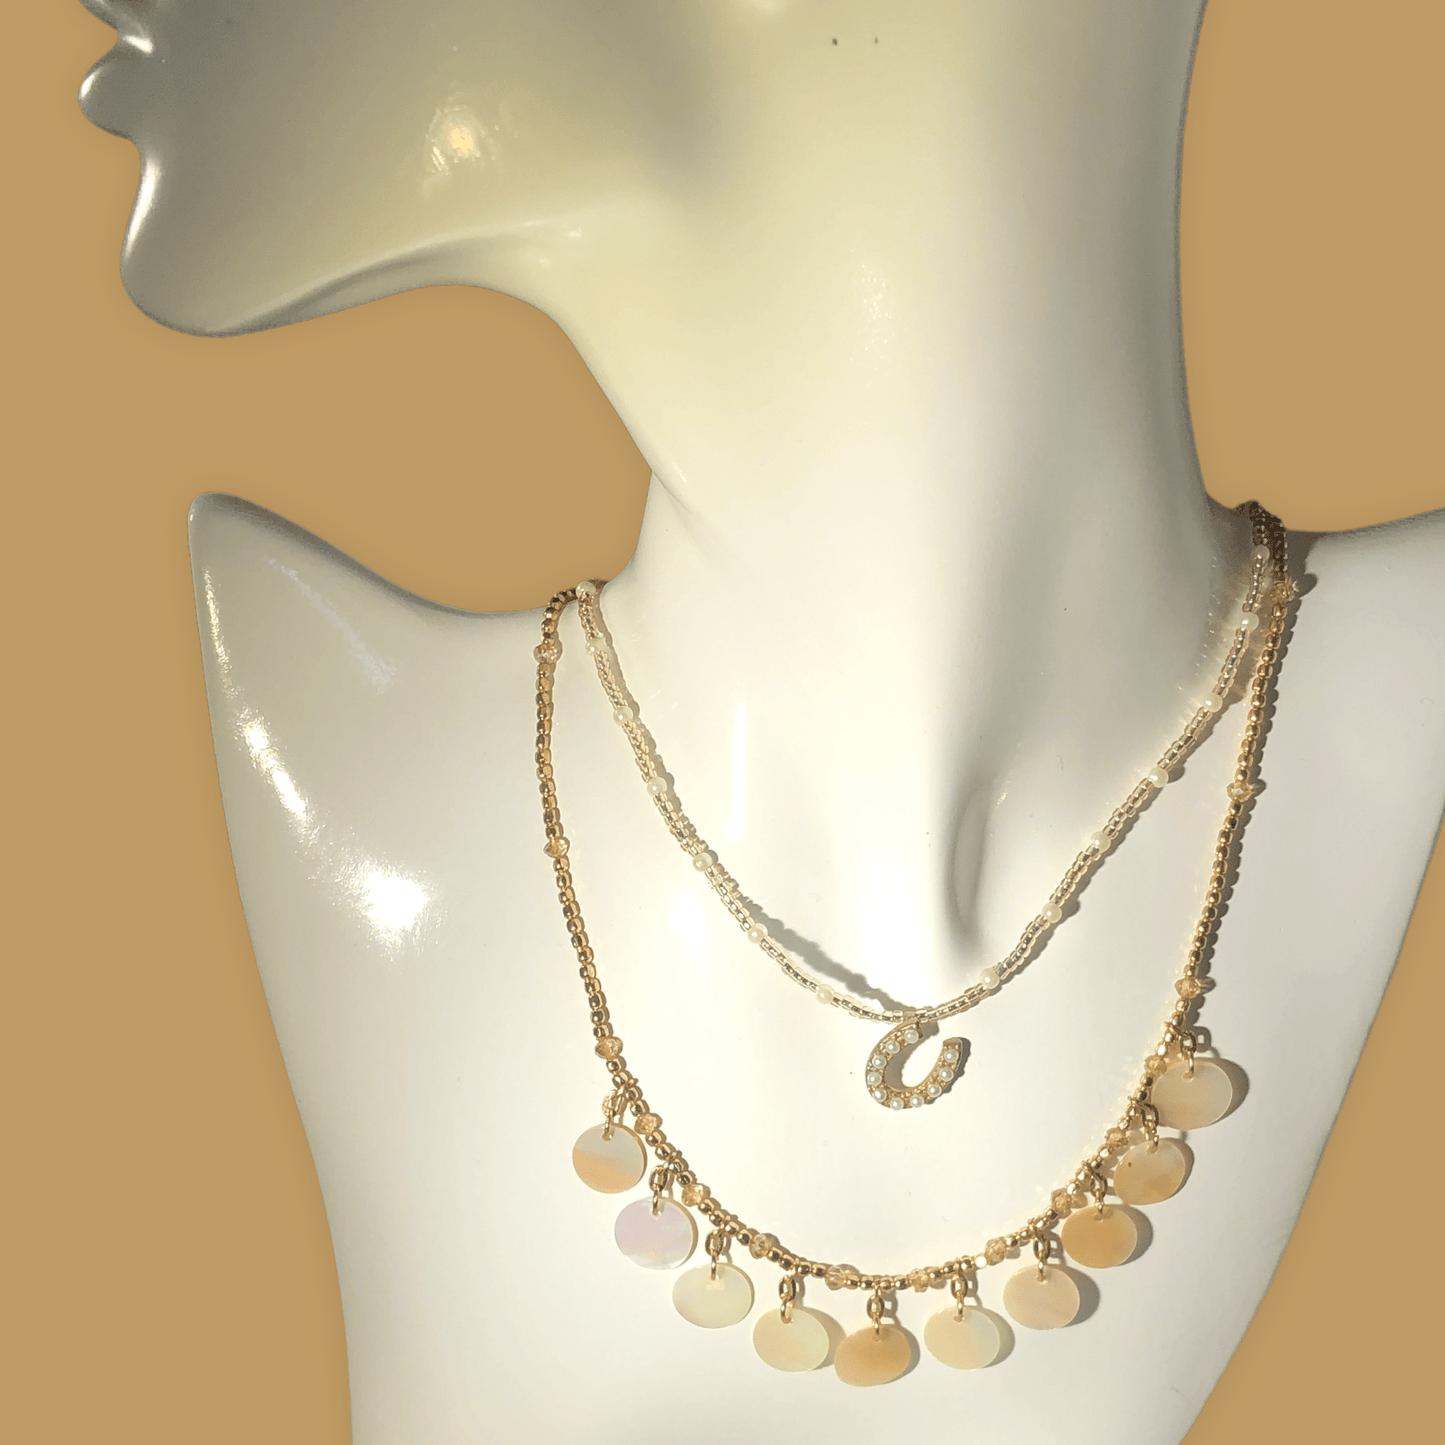 2 Beaded Choker Necklaces Bundle With Mother Of Pearl KAS WARWAS